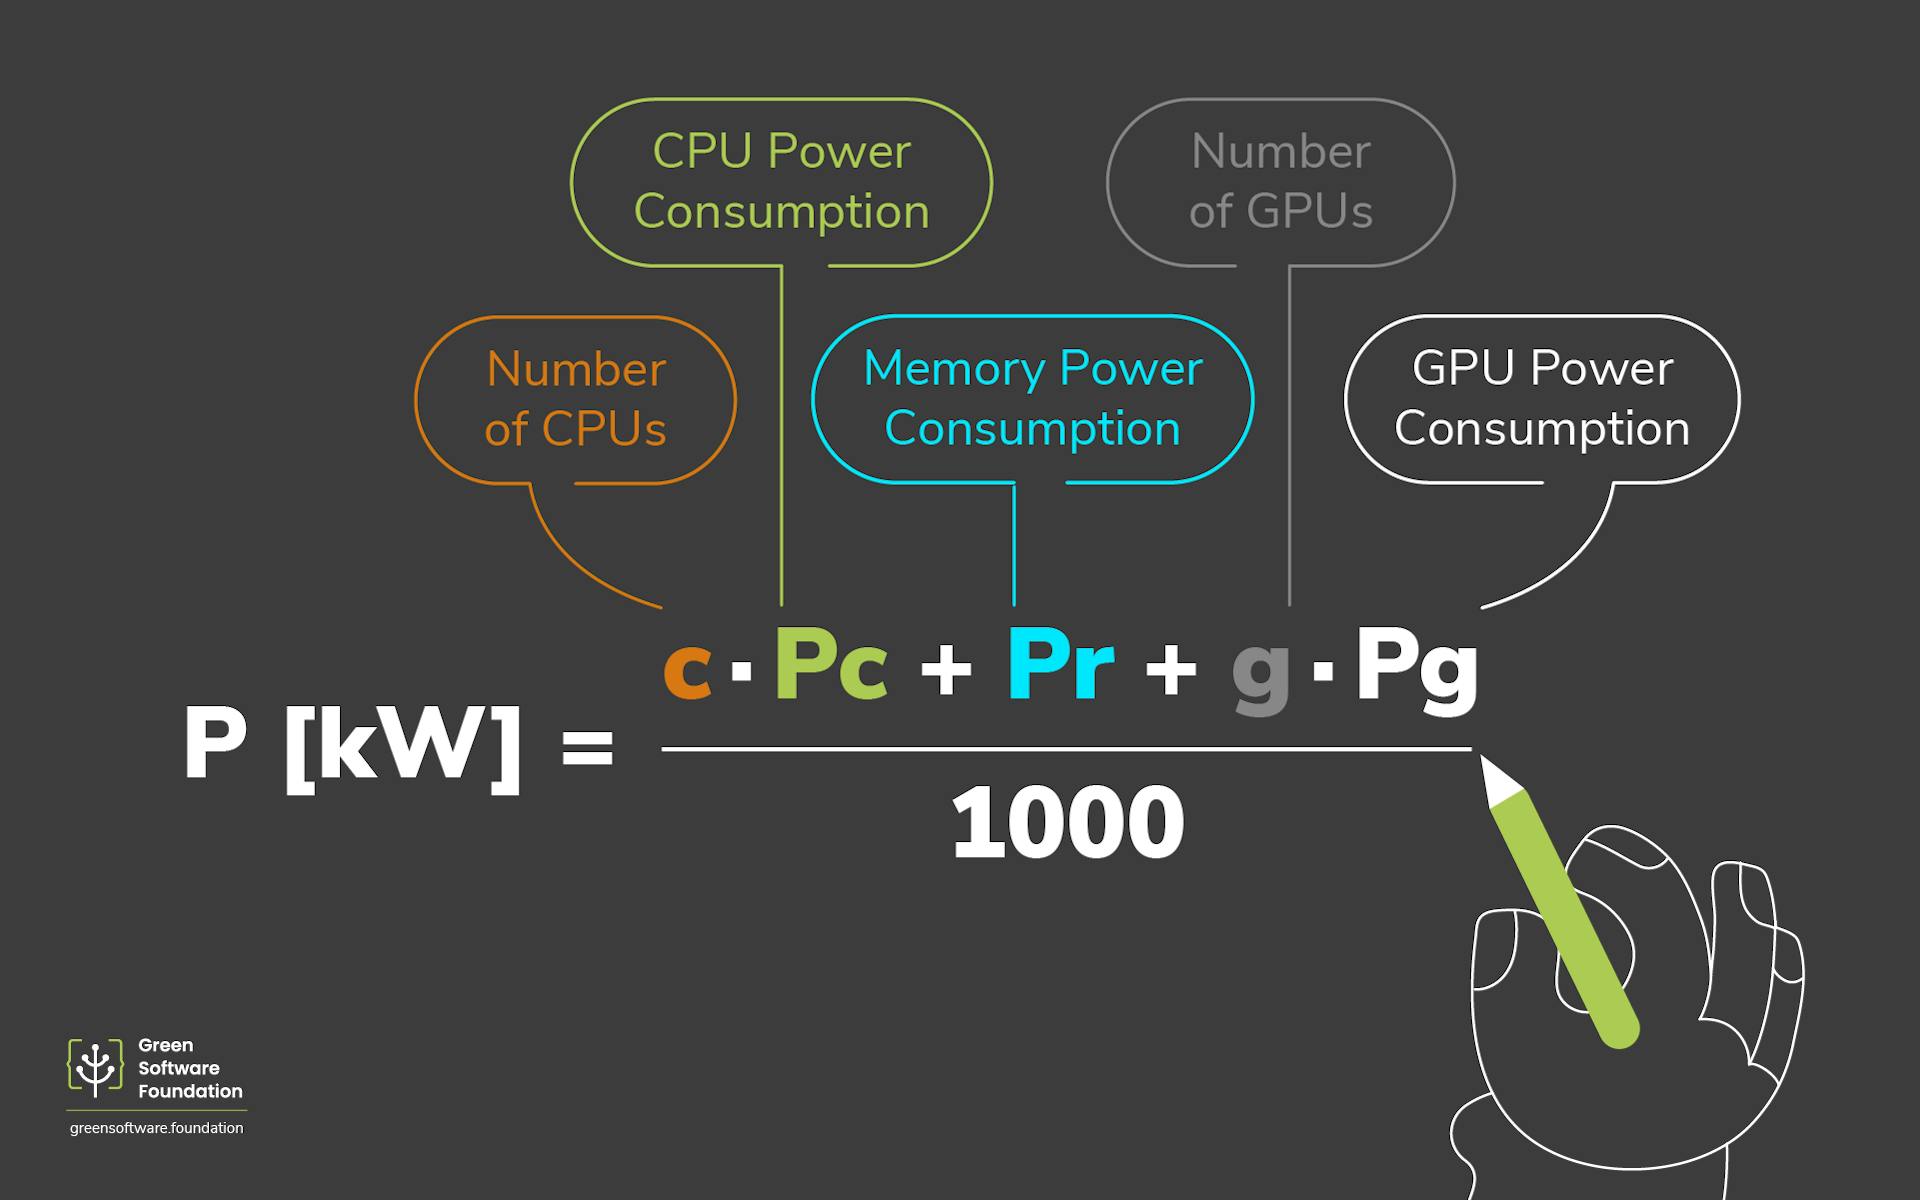 green-software-foundation-formula-for-measuring-power-consumption-of-different-hardware-components